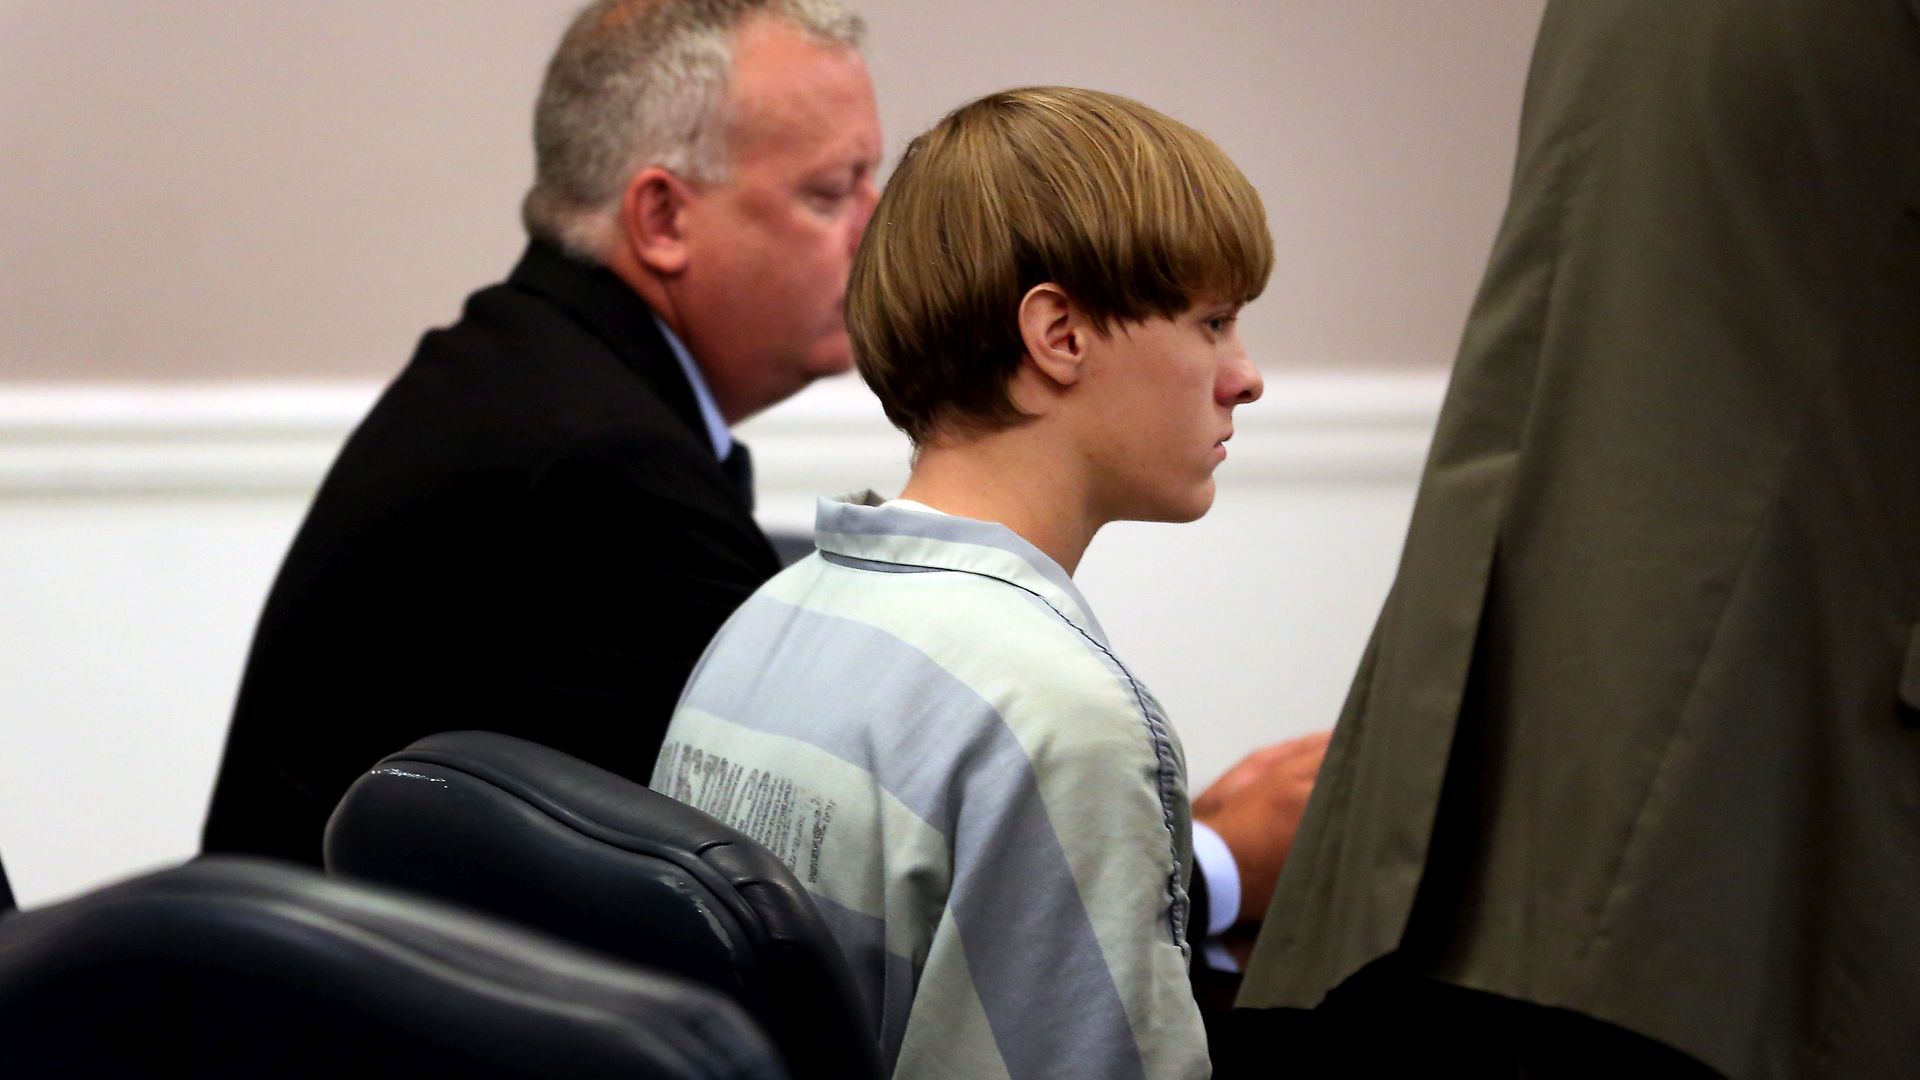  Dylan Roof (C), the suspect in the mass shooting that left nine dead in a Charleston church.